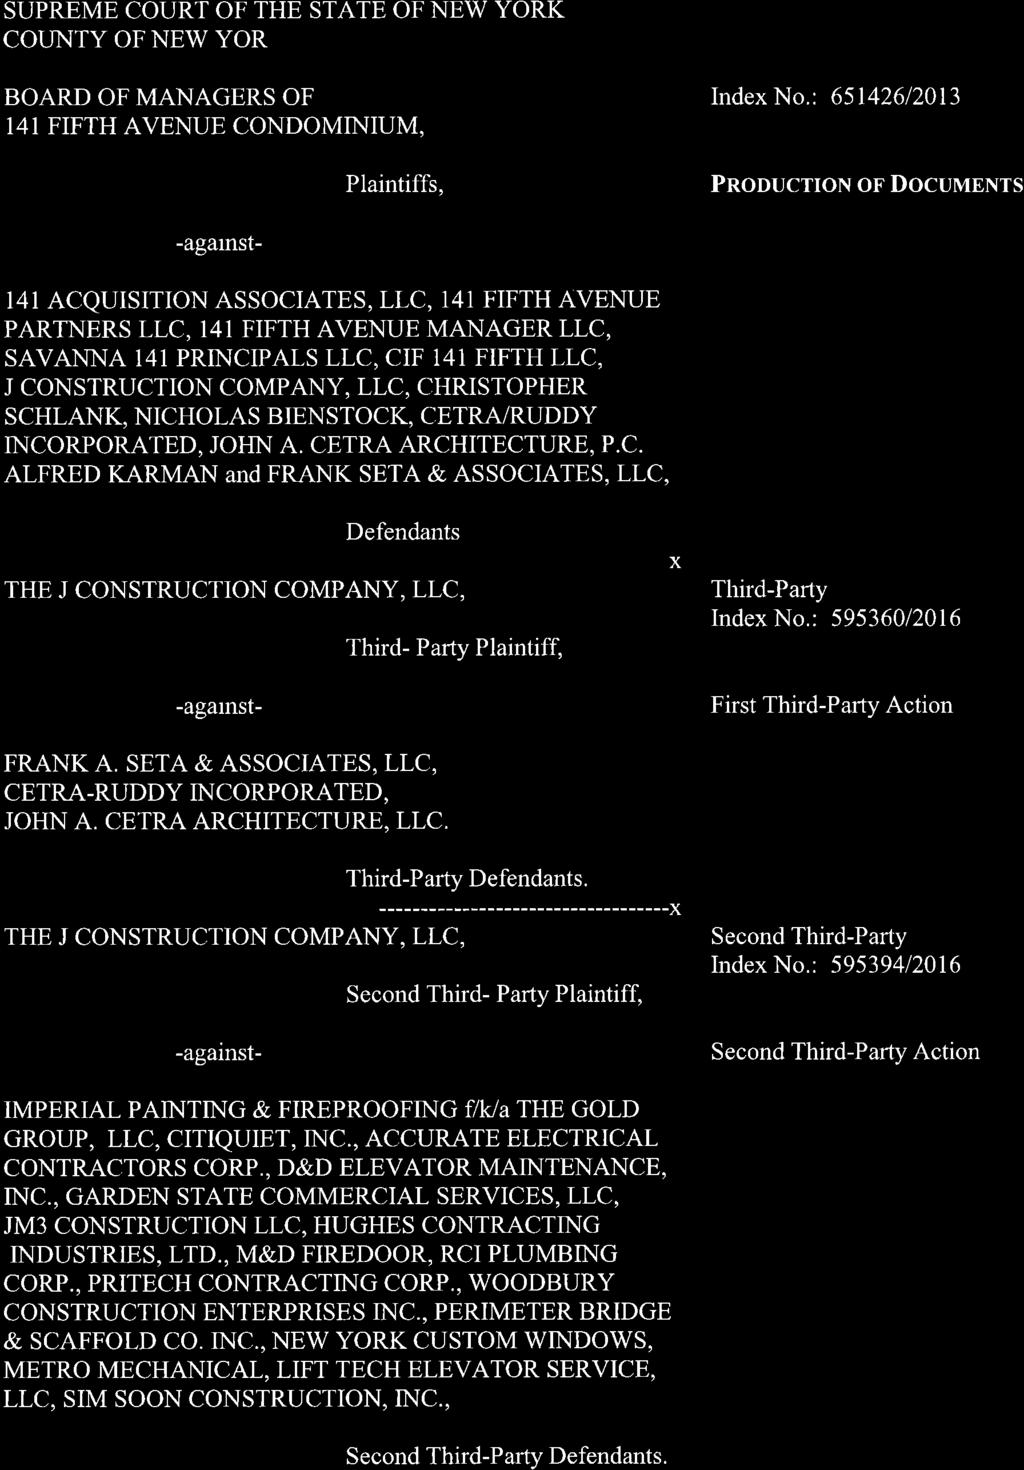 SUPREME COURT OF THE STATE OFNEW YORK COLTNTY OF NEW YORK -------------x BOARD OF MANAGERS OF 14I FIFTH AVENUE CONDOMINIUM, Plaintiffs, Index No.